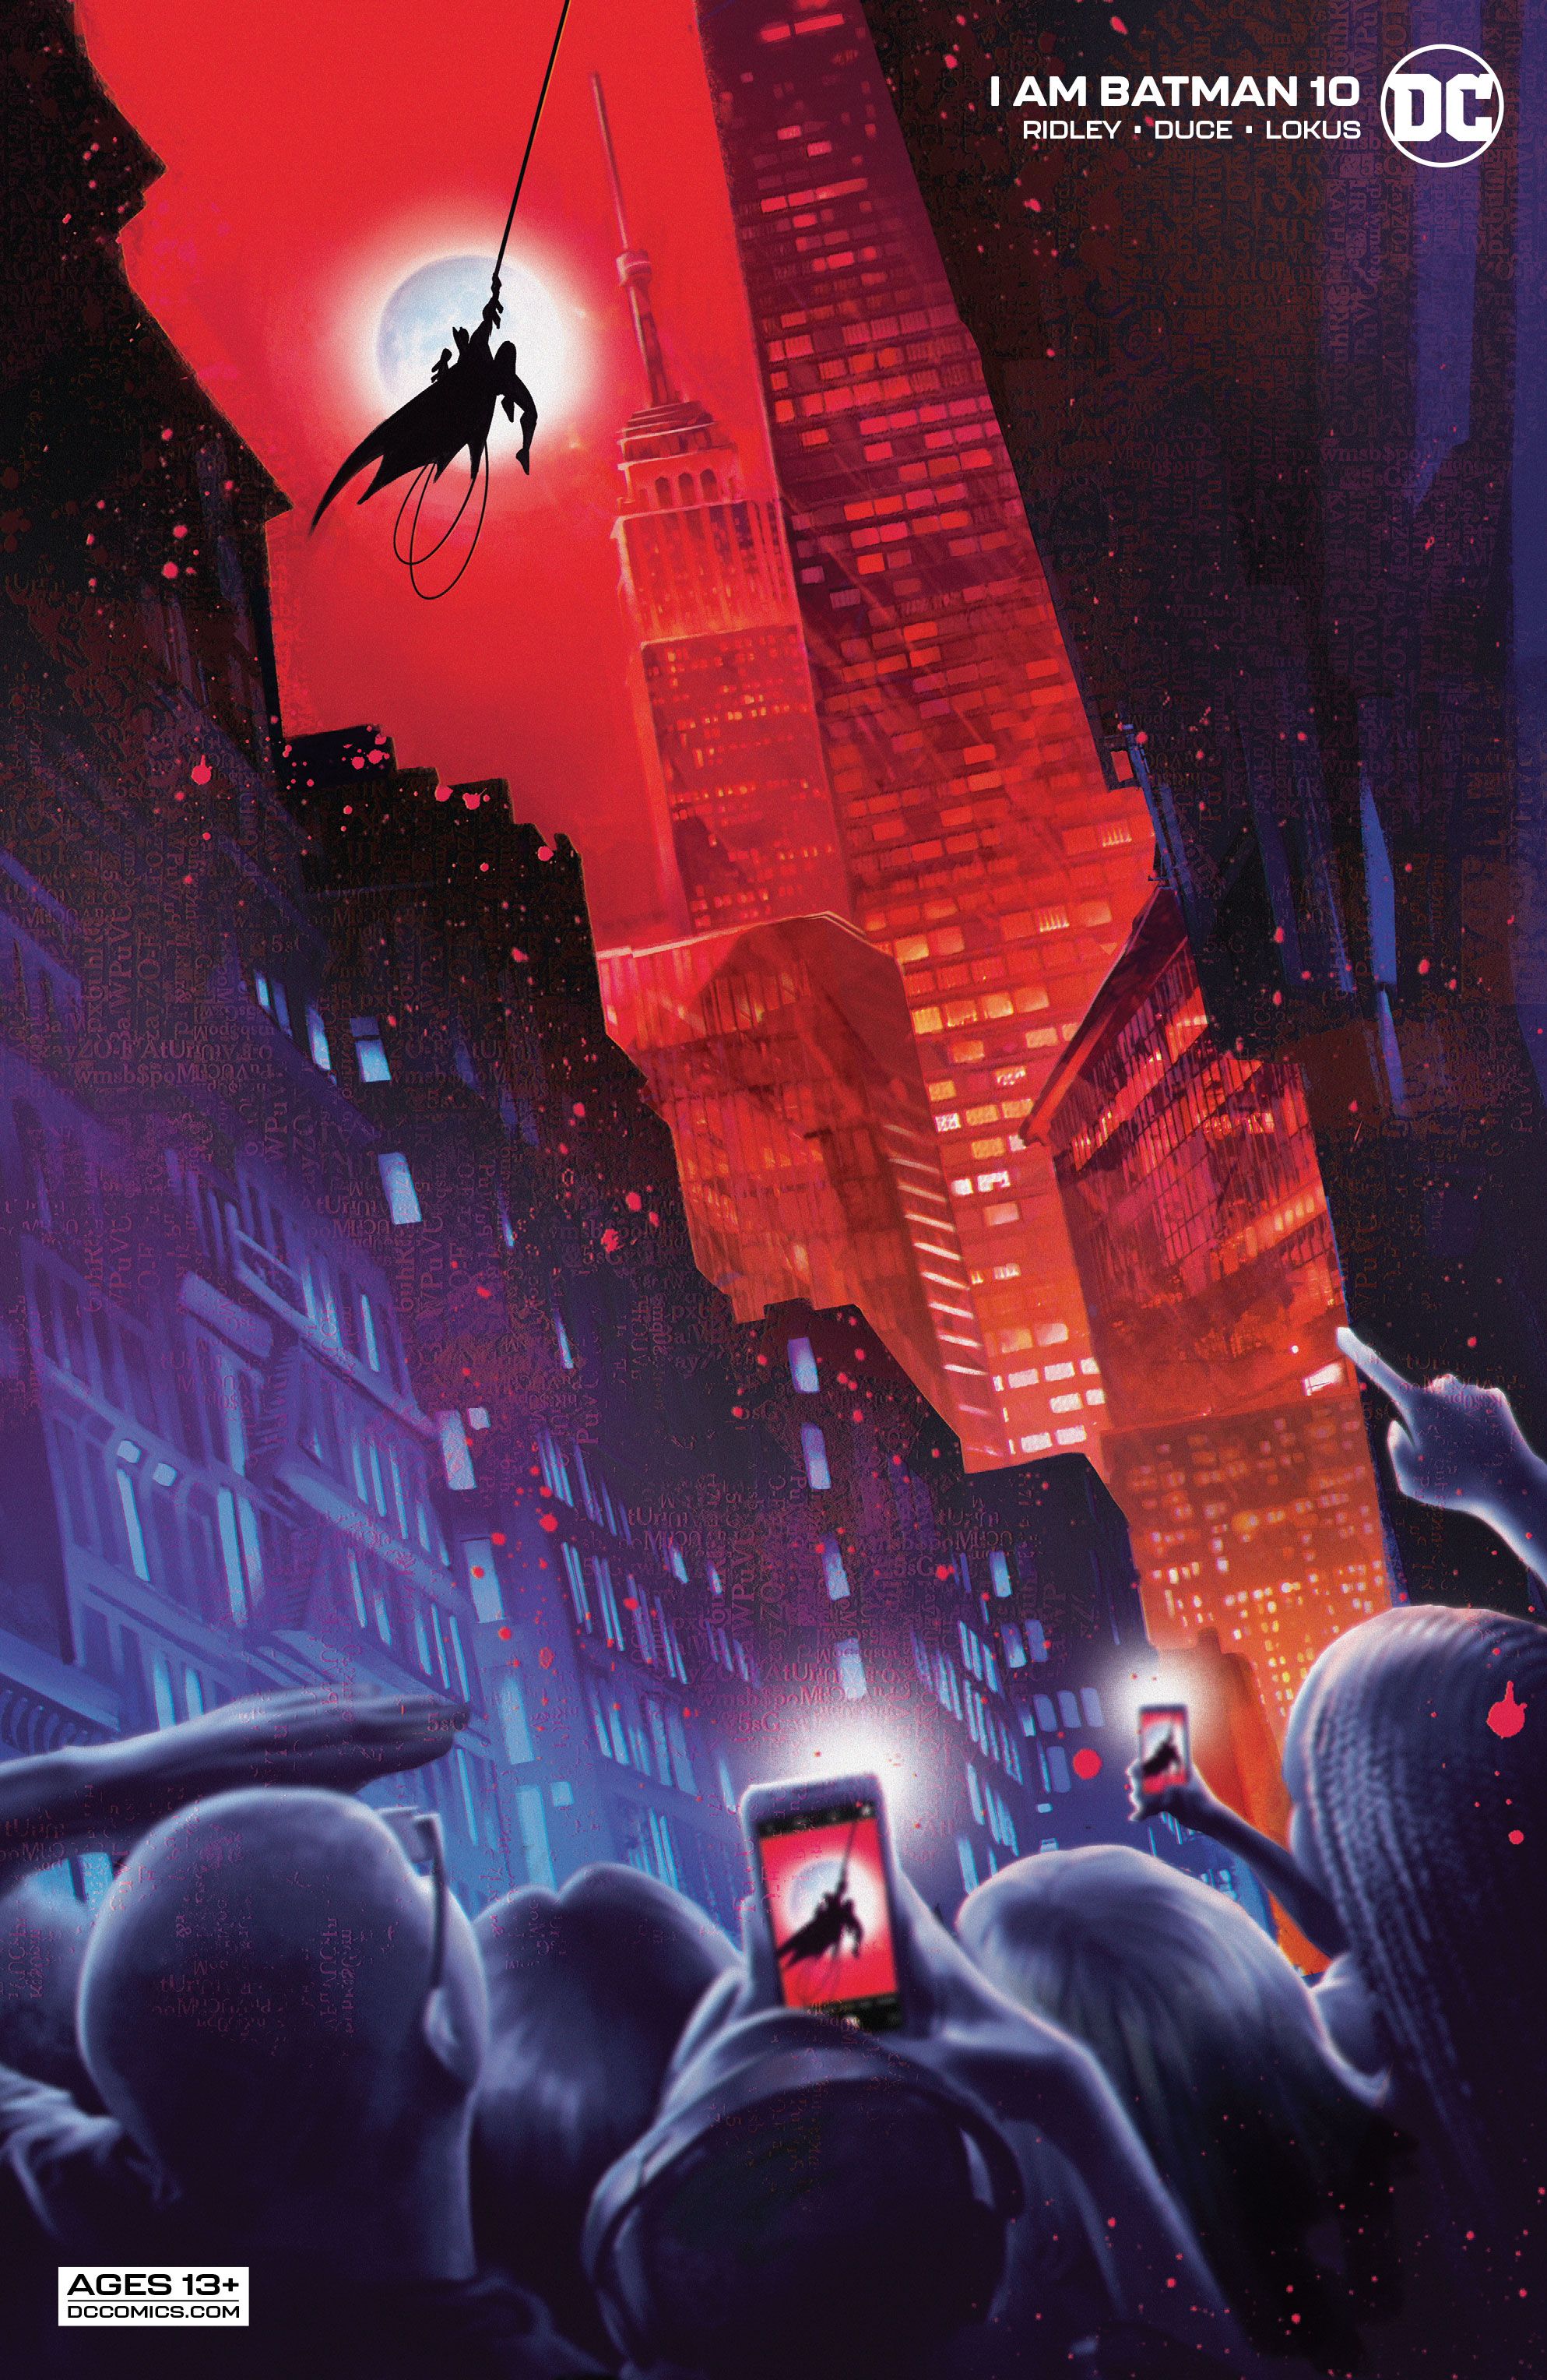 Batman’s New Villain Wants to Irreversibly Change New York City Forever